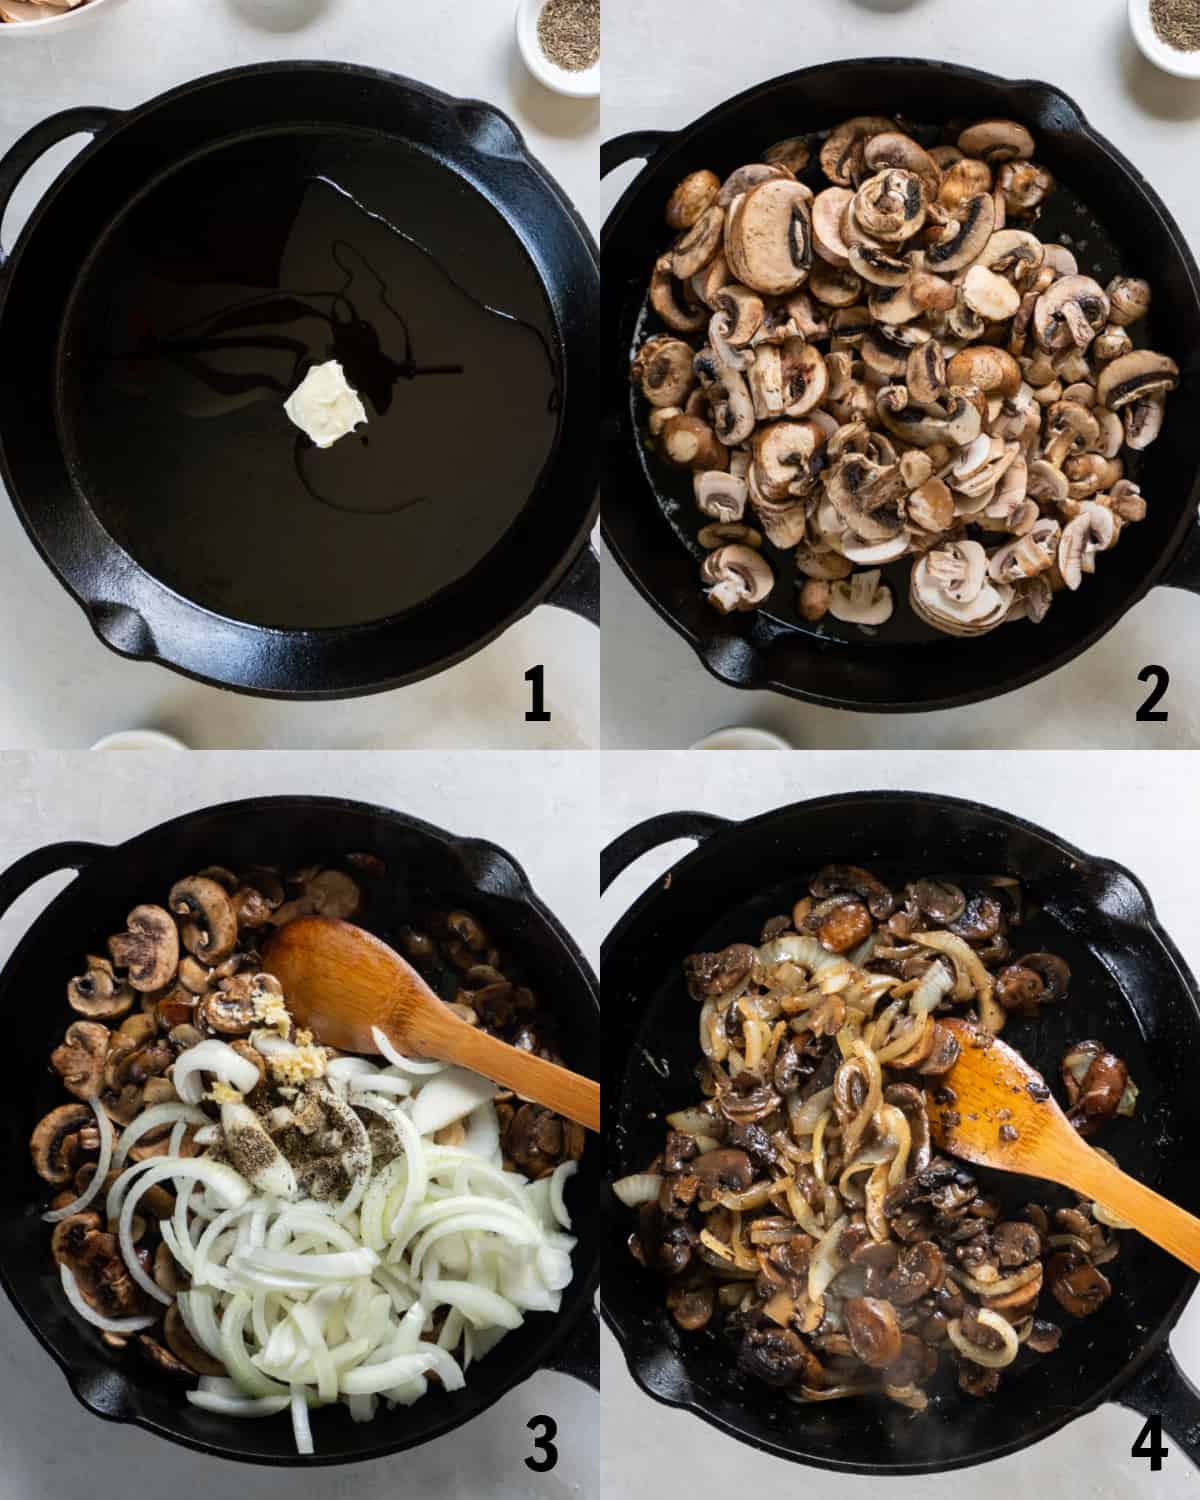 Sauteeing the butter in a skillet before adding the mushrooms, onions and seasonings.